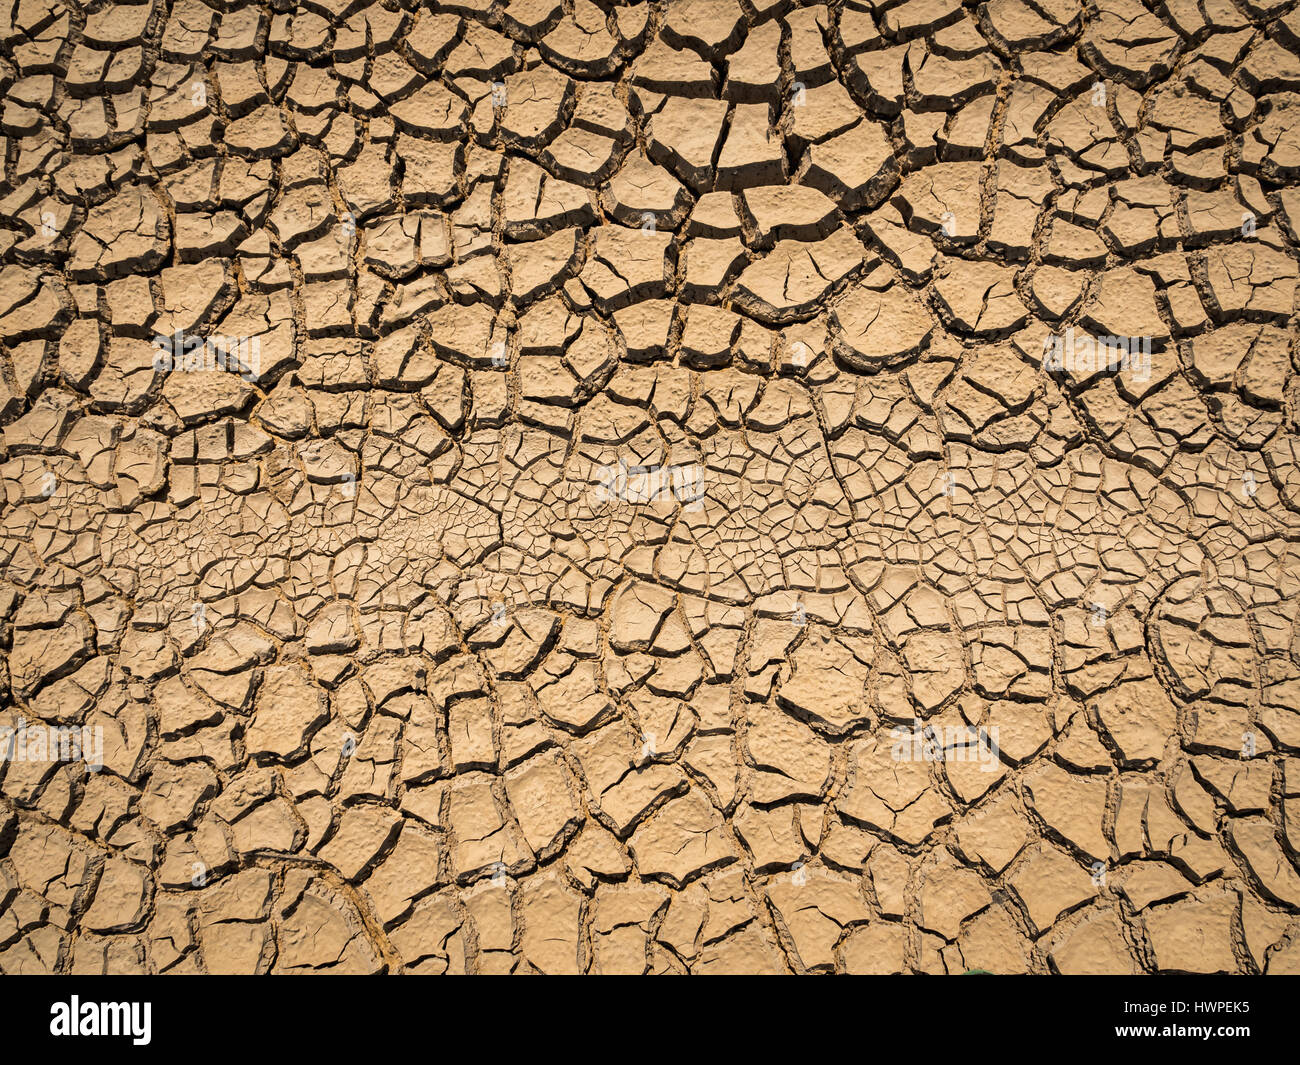 dried and cracked soil in arid season. Stock Photo